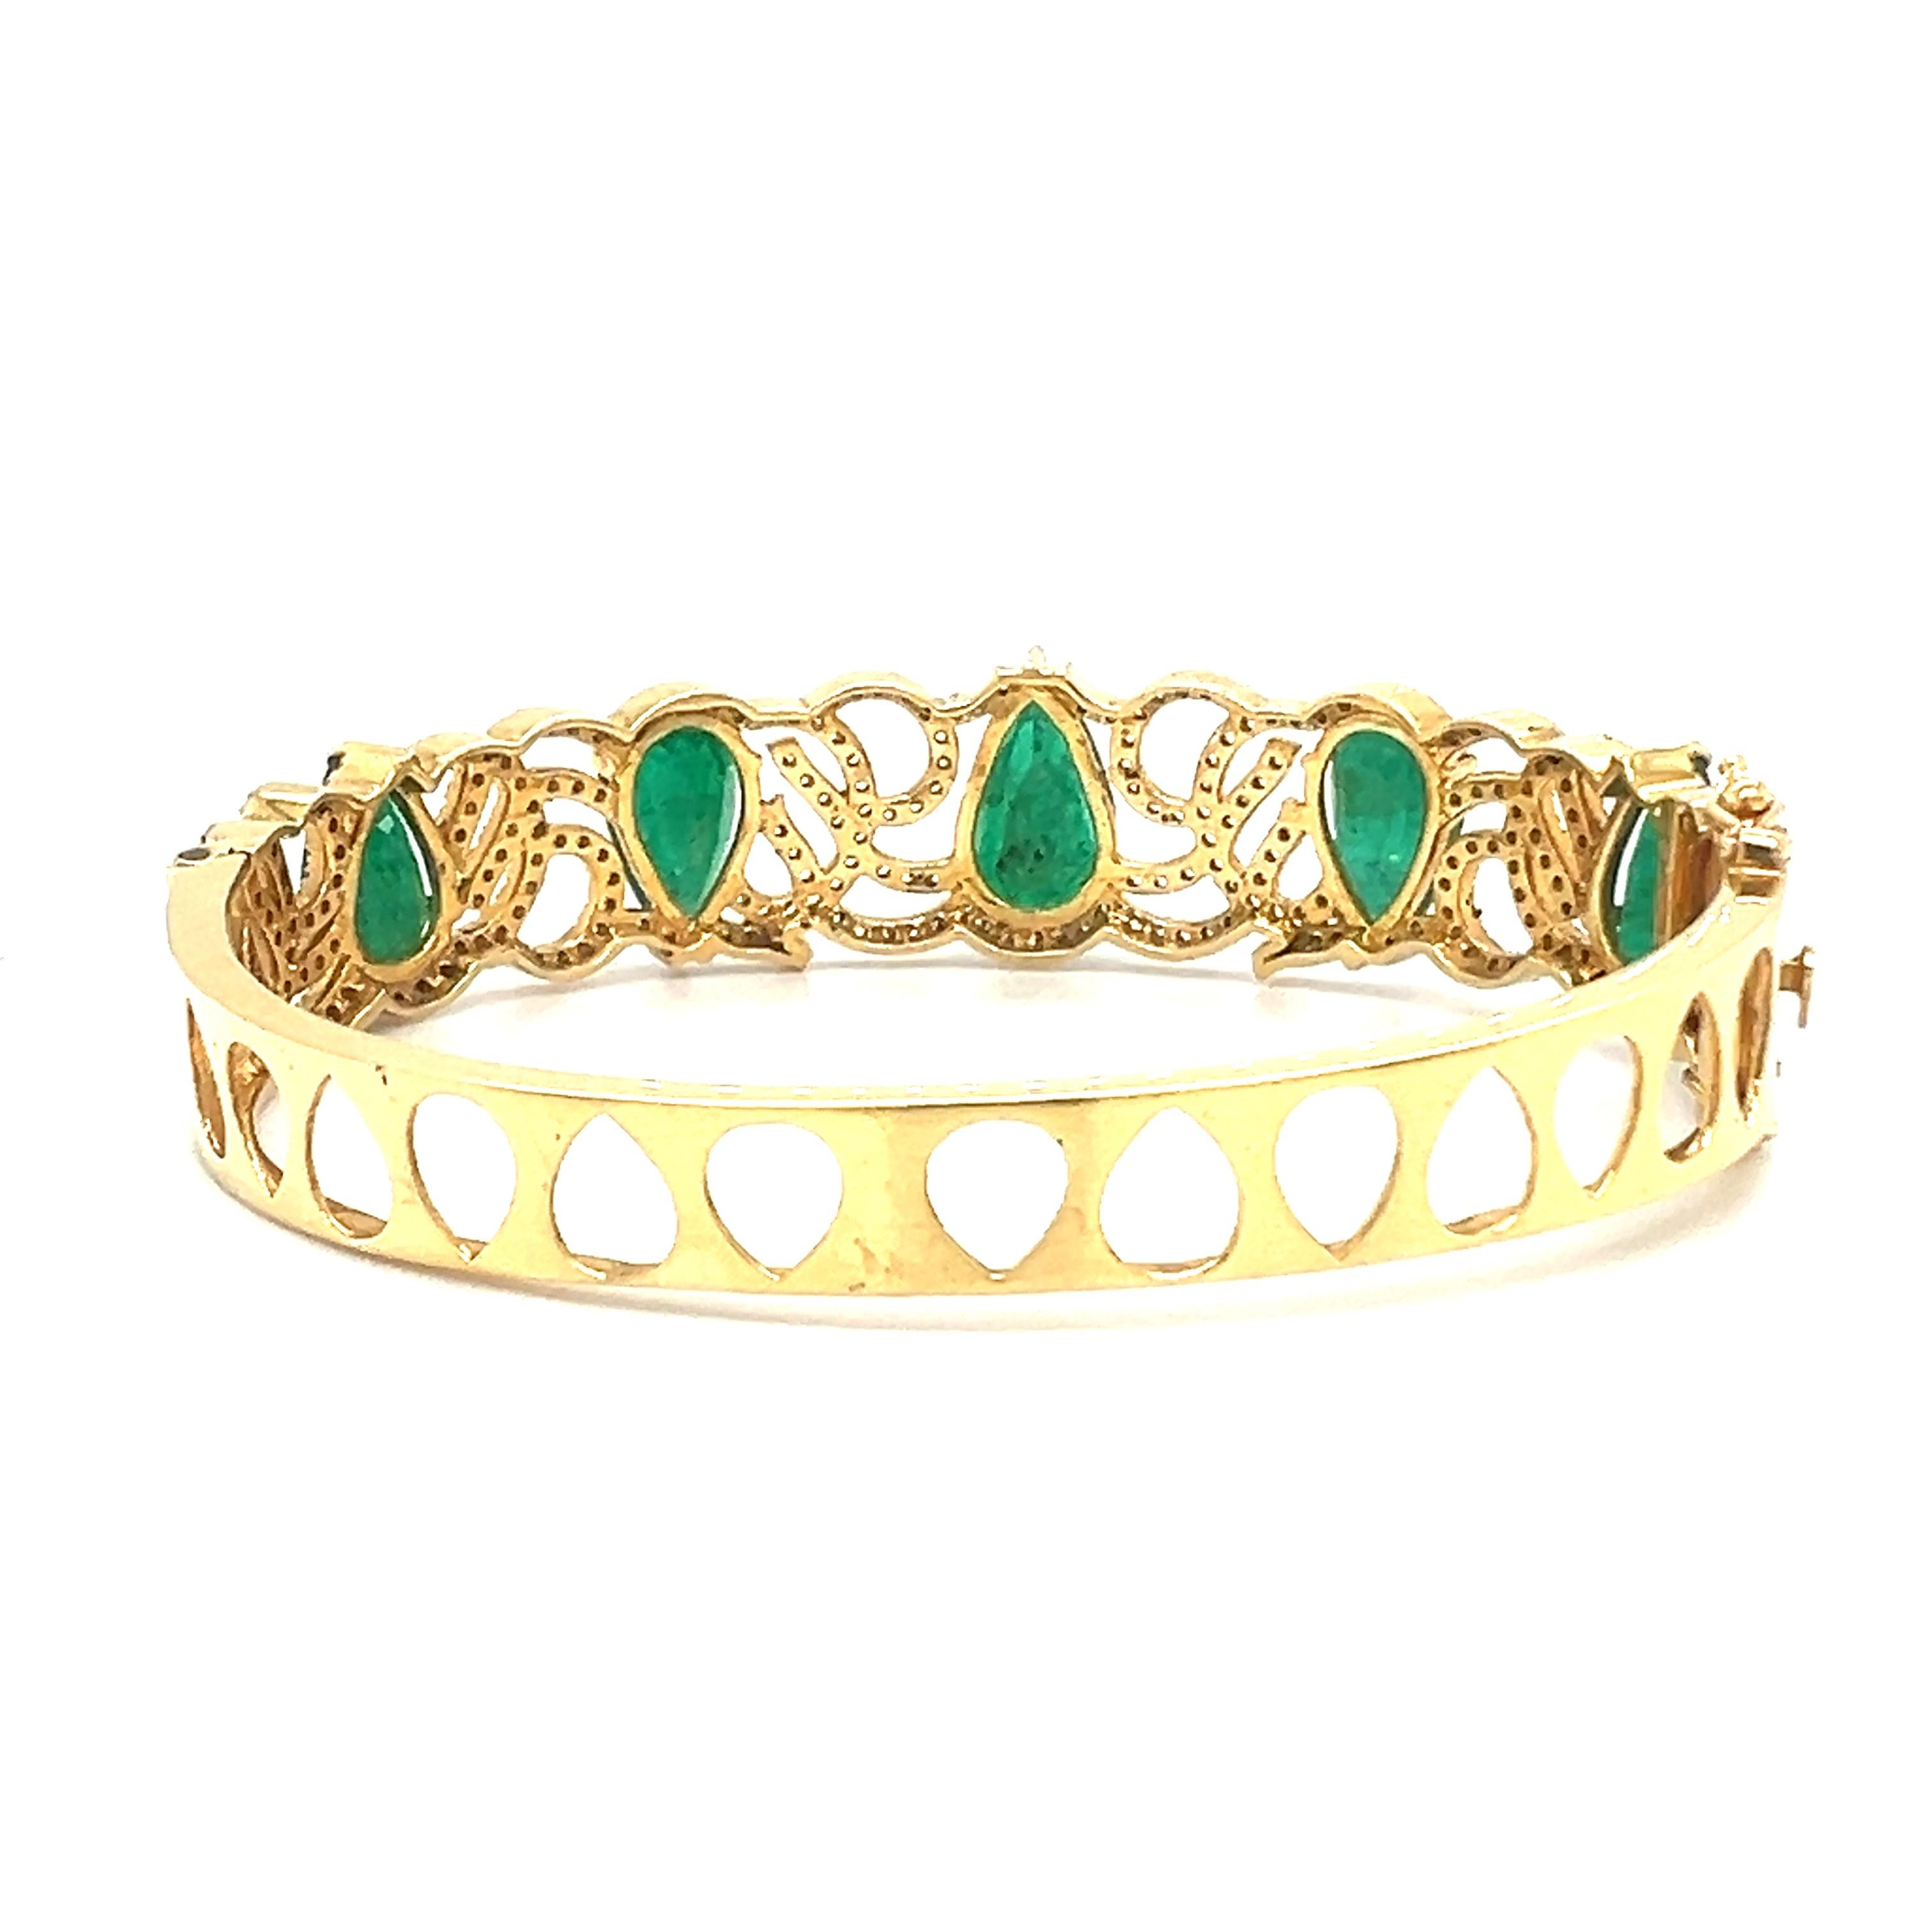 A GIA Certified beautiful bangle made with 18-kt yellow gold and feature with natural 13.35-carat emerald and 1.79-carat of diamonds. 